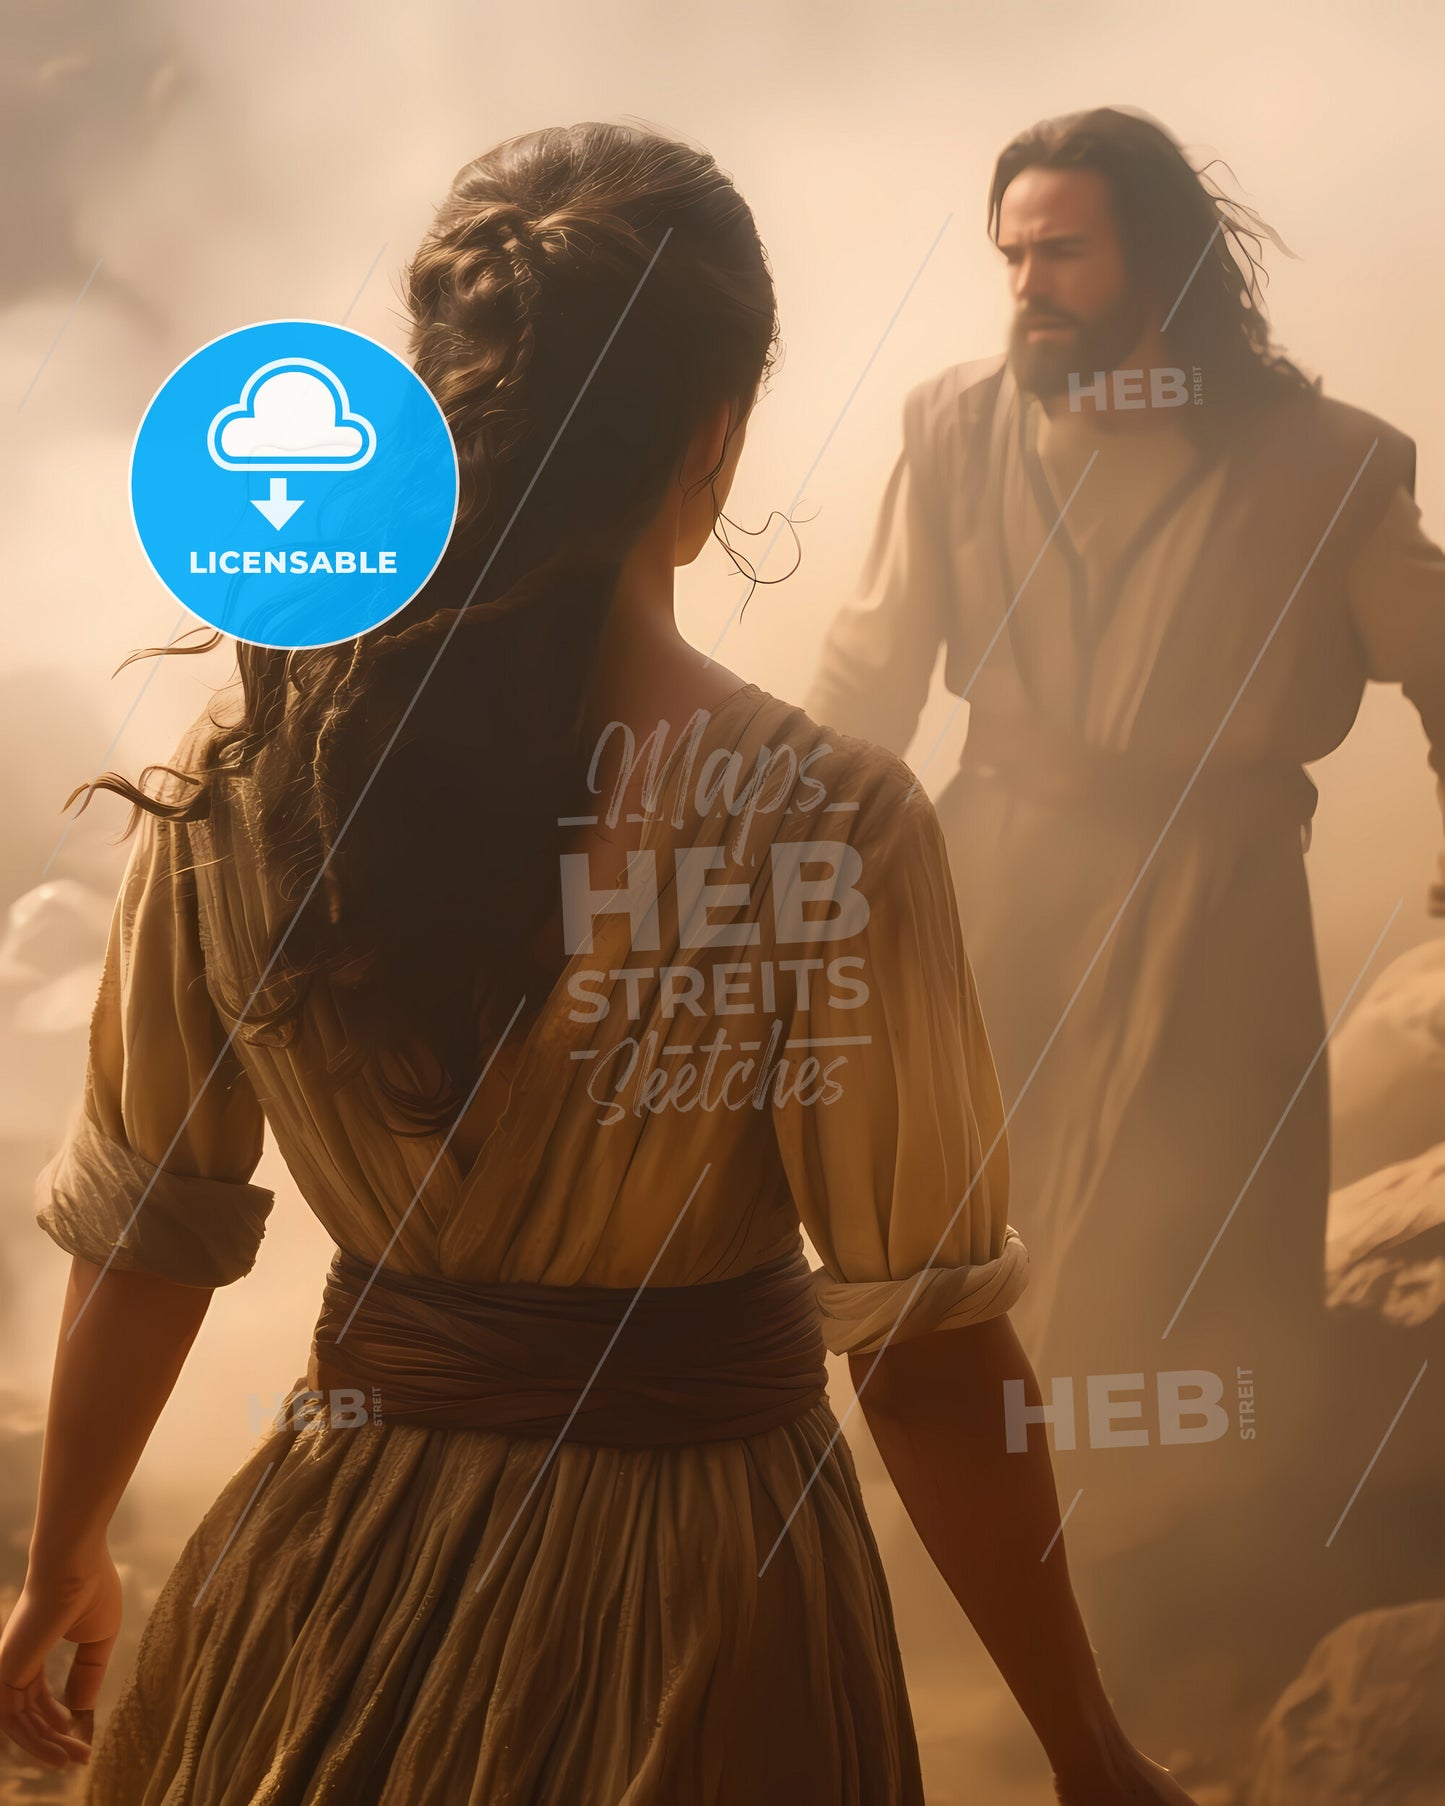 We See The Back Of Young Woman With Dark Wavy Hair Wearing A Brown Dress Is Running Toward Jesus A Man With Dark Long Hair And A Brown Rugged Robe - A Woman In A Long Dress Looking At A Man In A Foggy Environment